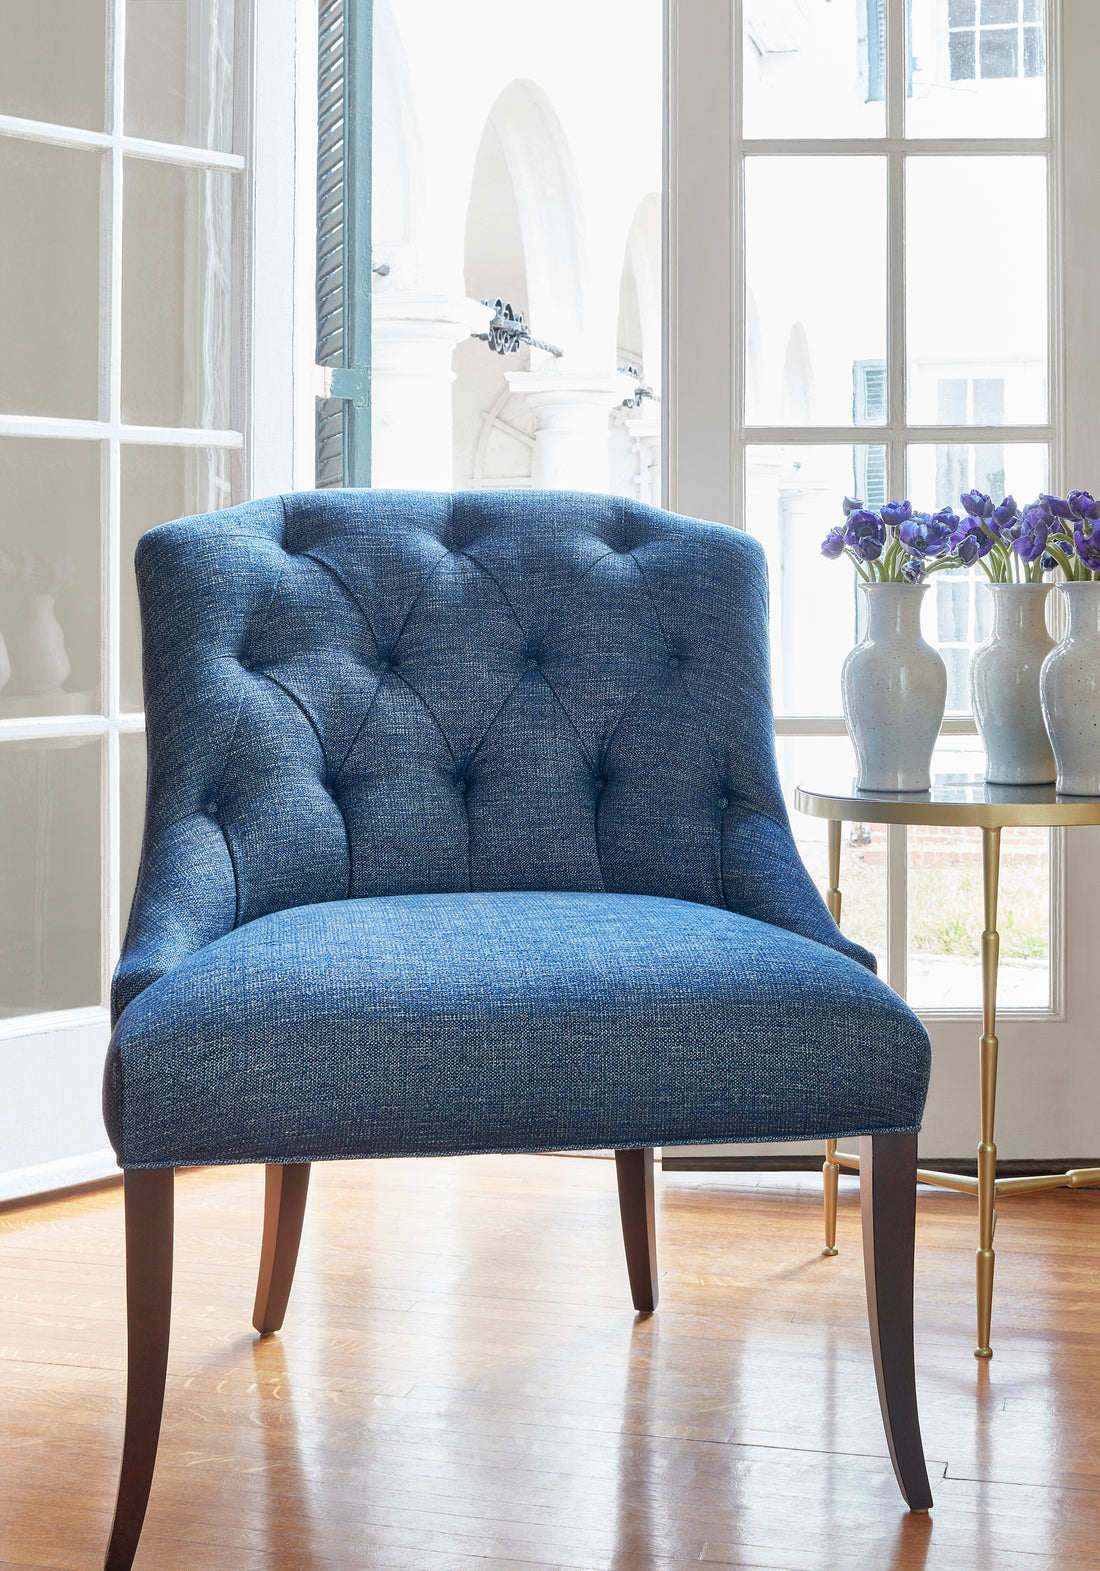 Belaire Chair in Dante woven fabric in navy color - pattern number W80700 - by Thibaut in the Woven Resource Vol 11 Rialto collection